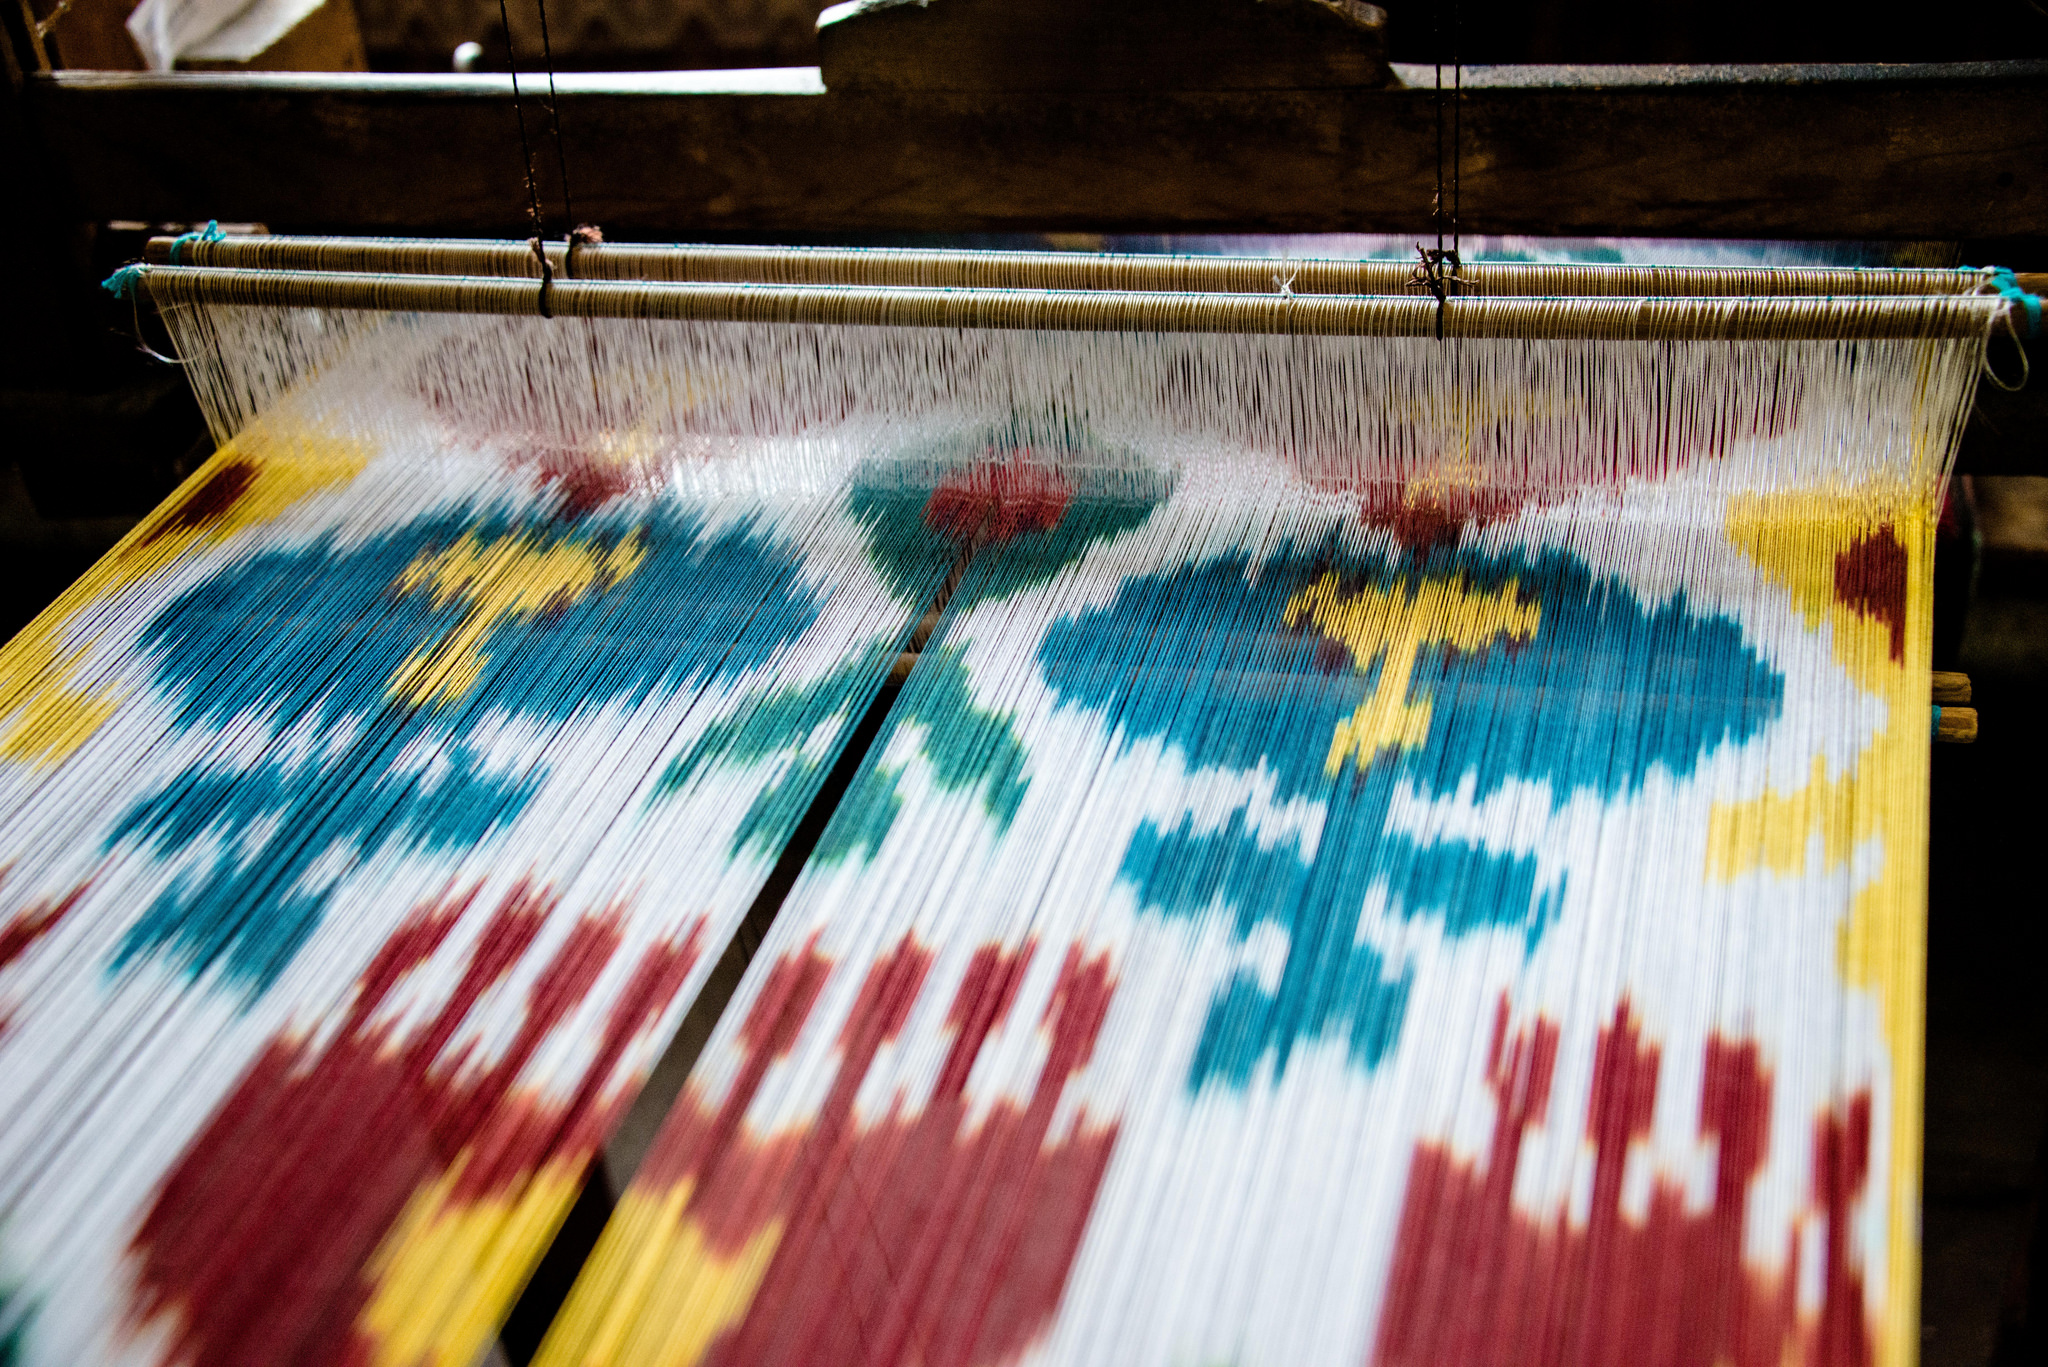 Ikat production. Image: 2008+ under a CC licence